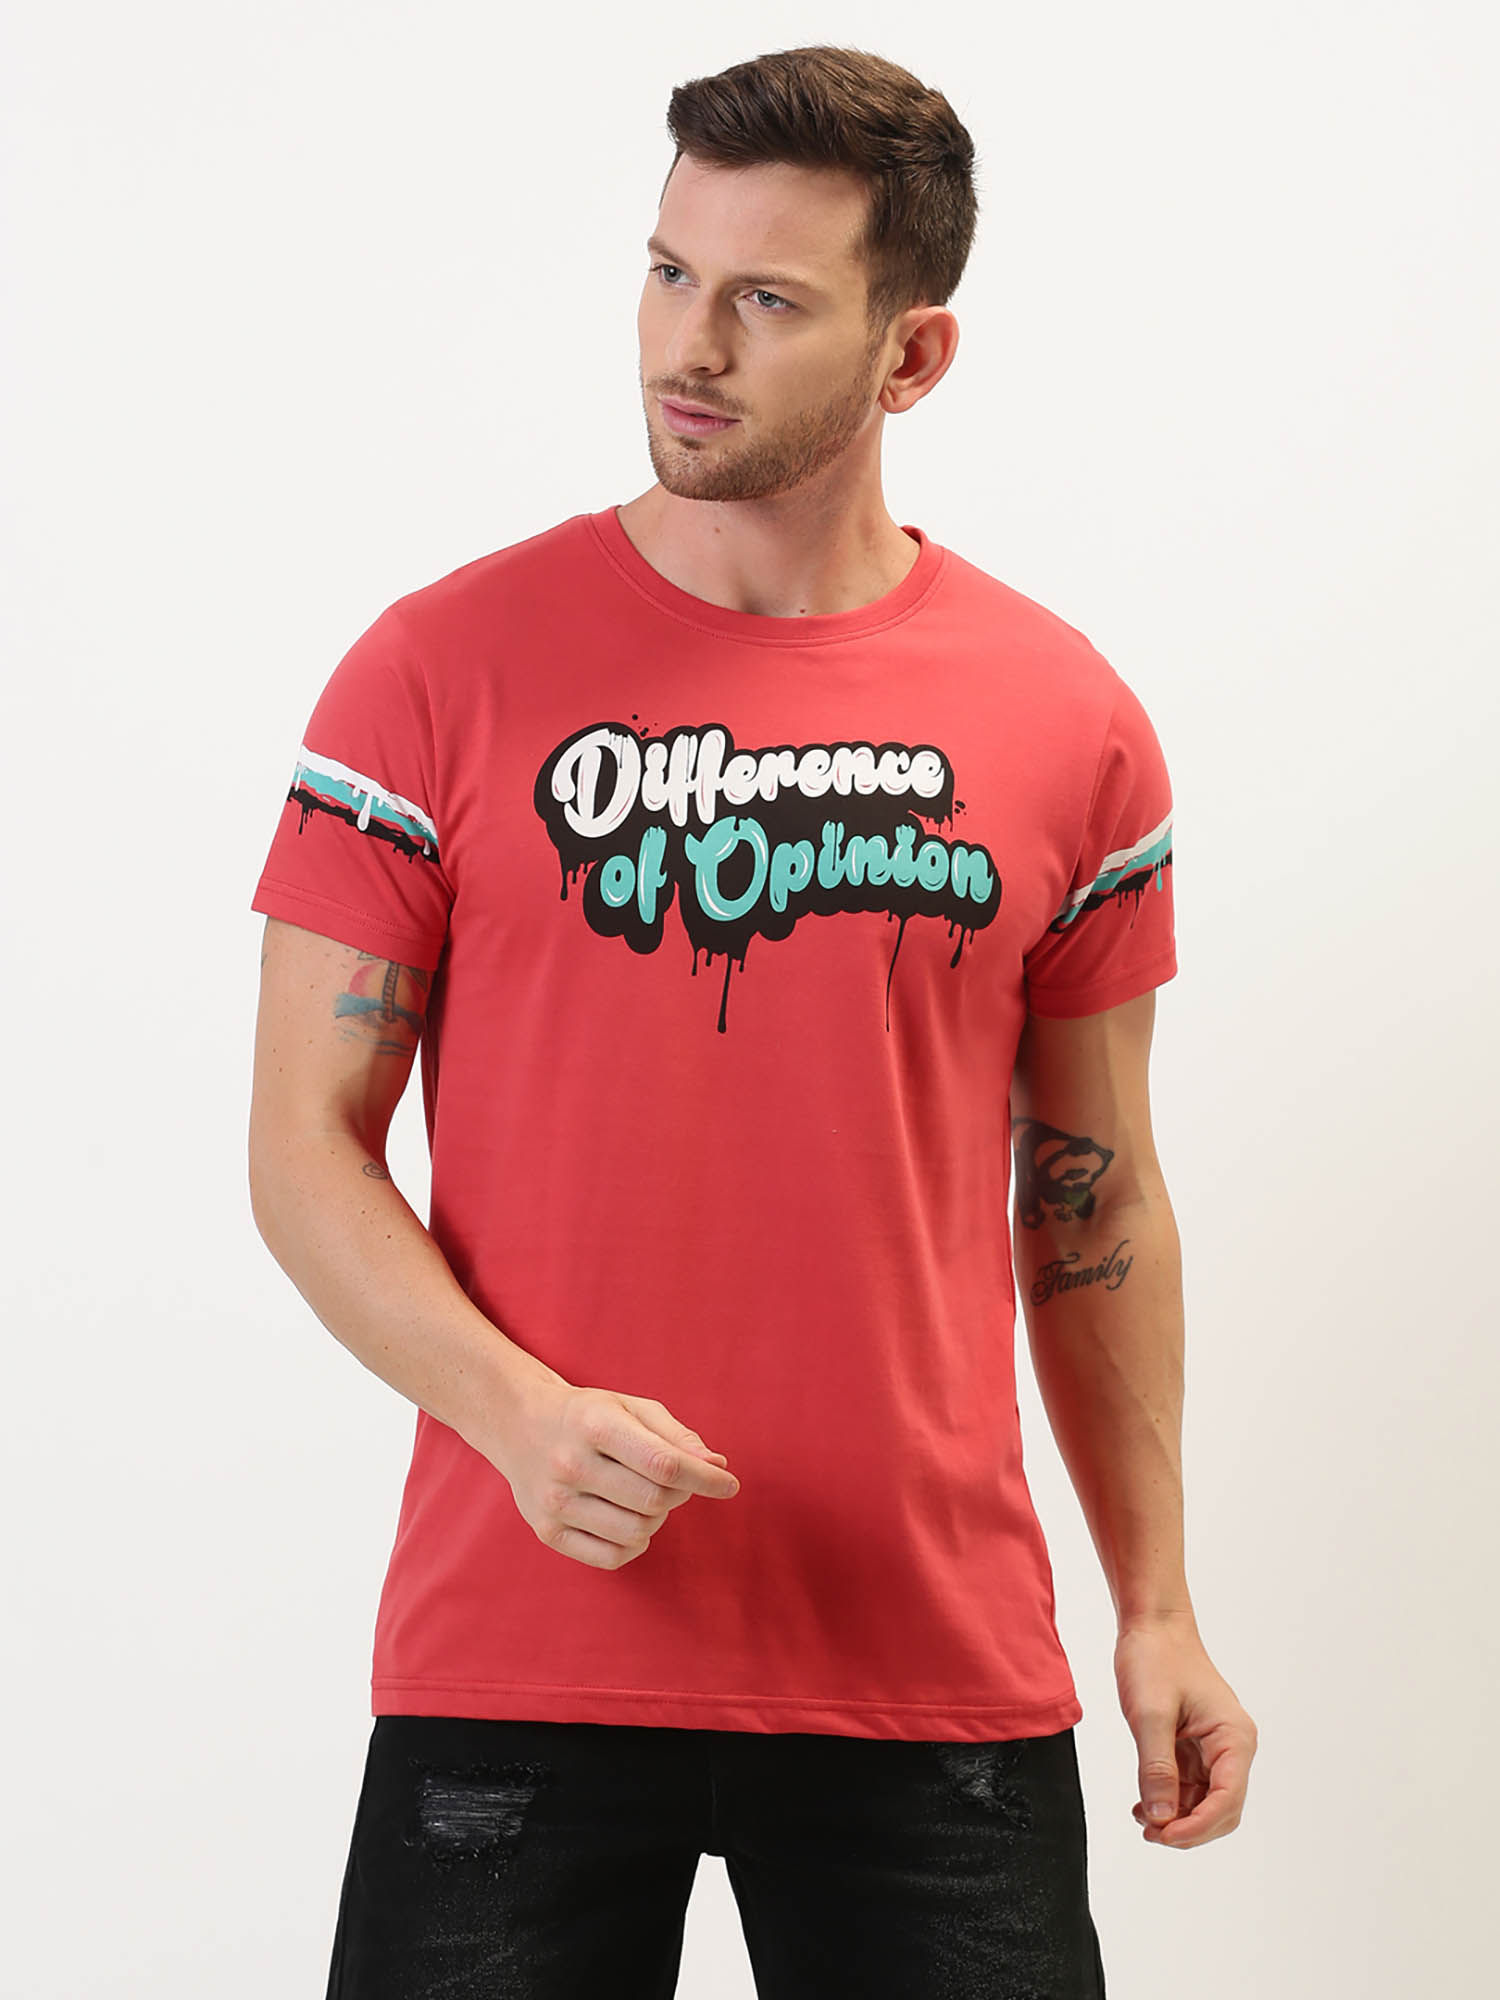 Difference of Opinion Printed T-Shirt (XL)